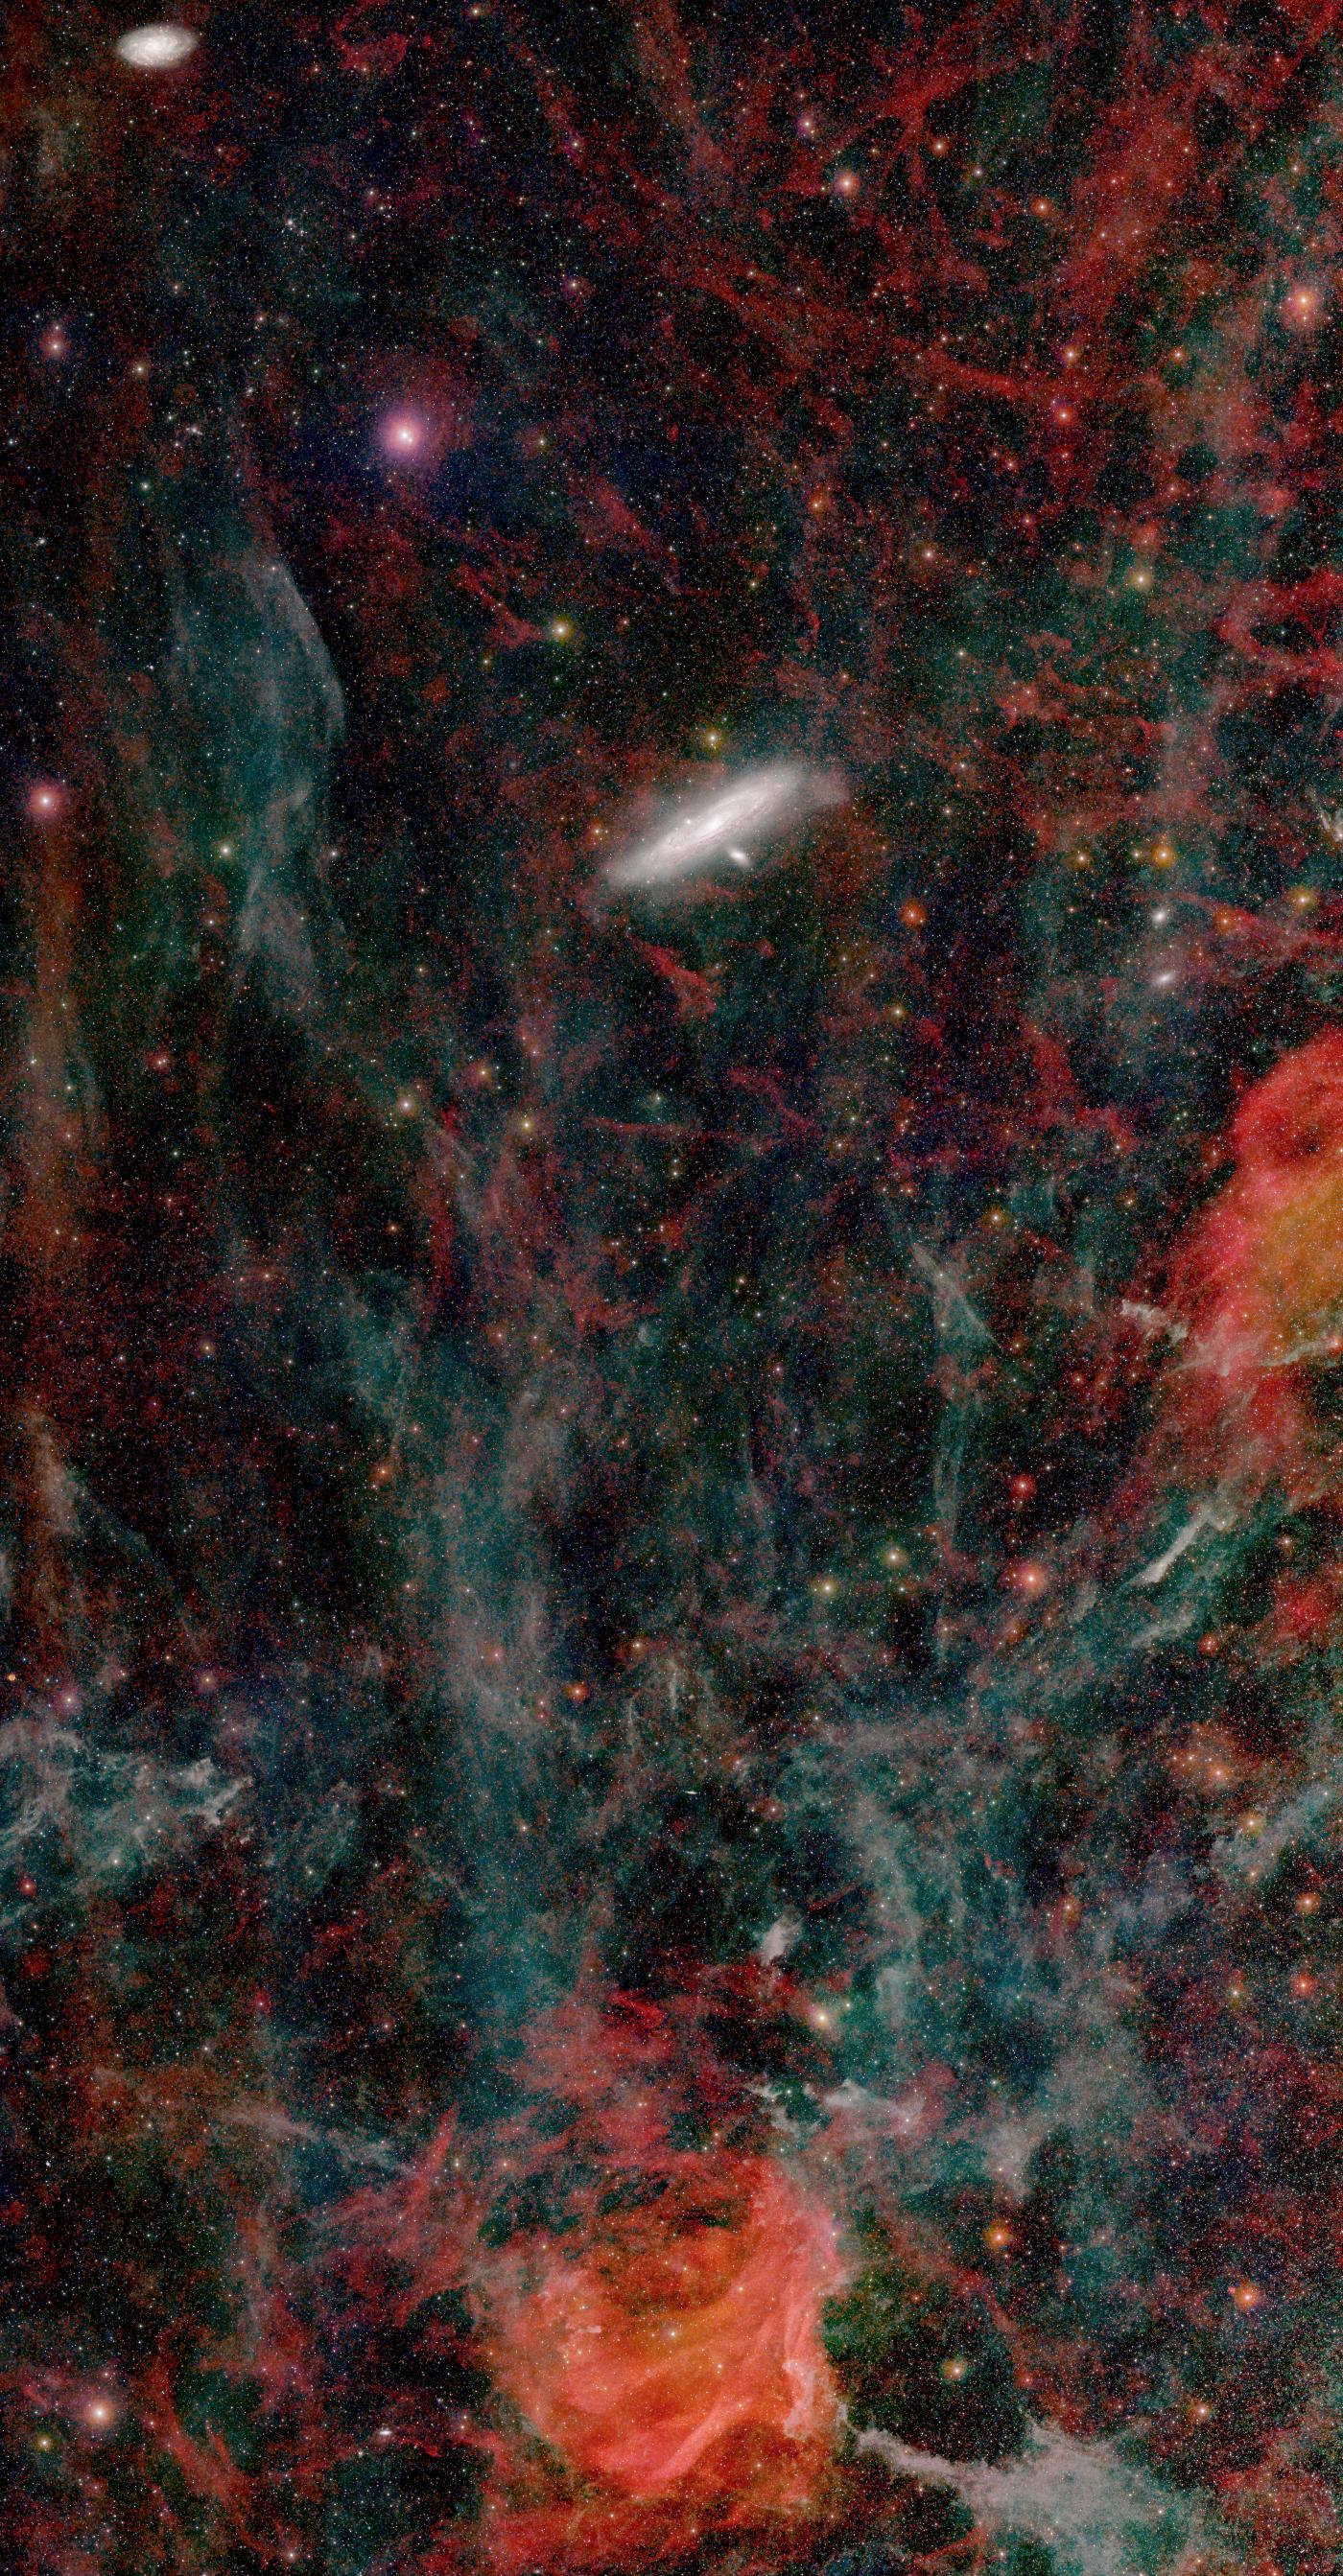 M33 to SH2-126 in H-alpha (red), blue continuum (green) and red continuum (blue)